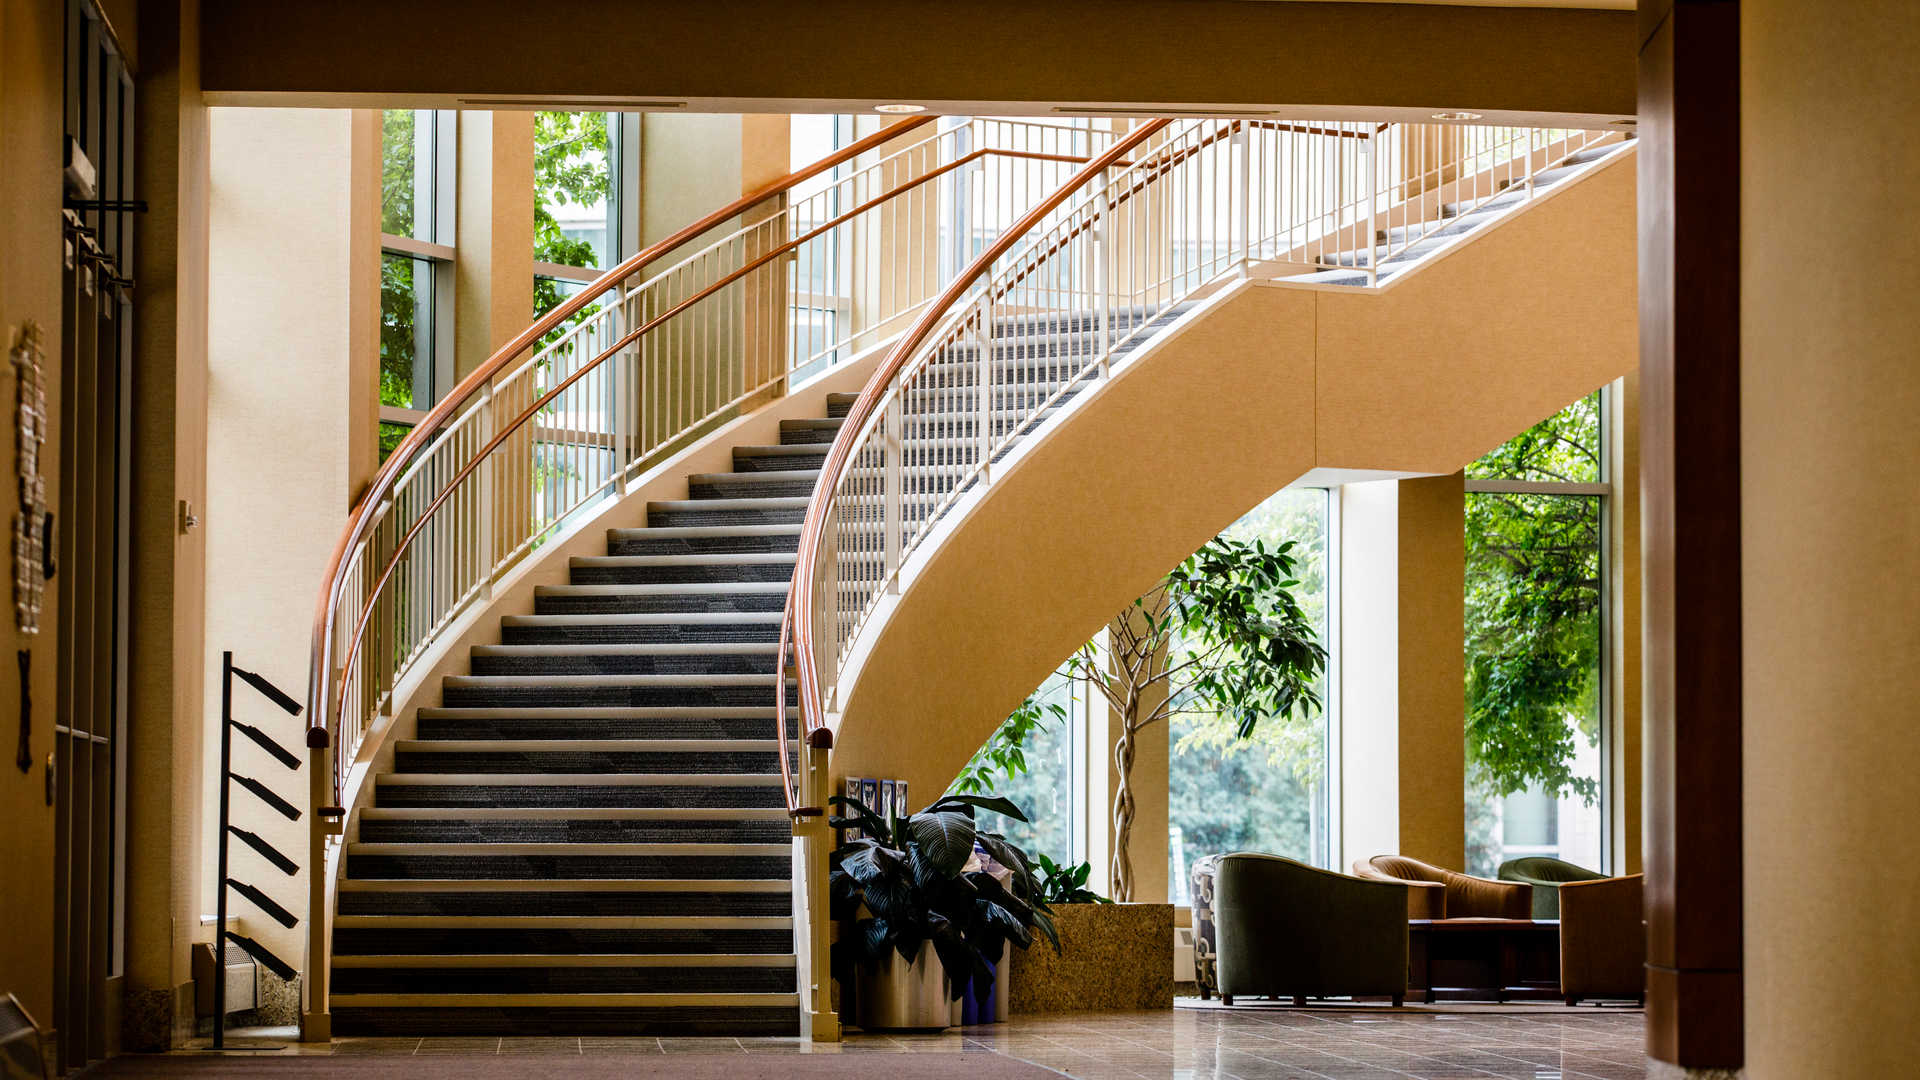  The atrium in Schulze Hall, including the stair case